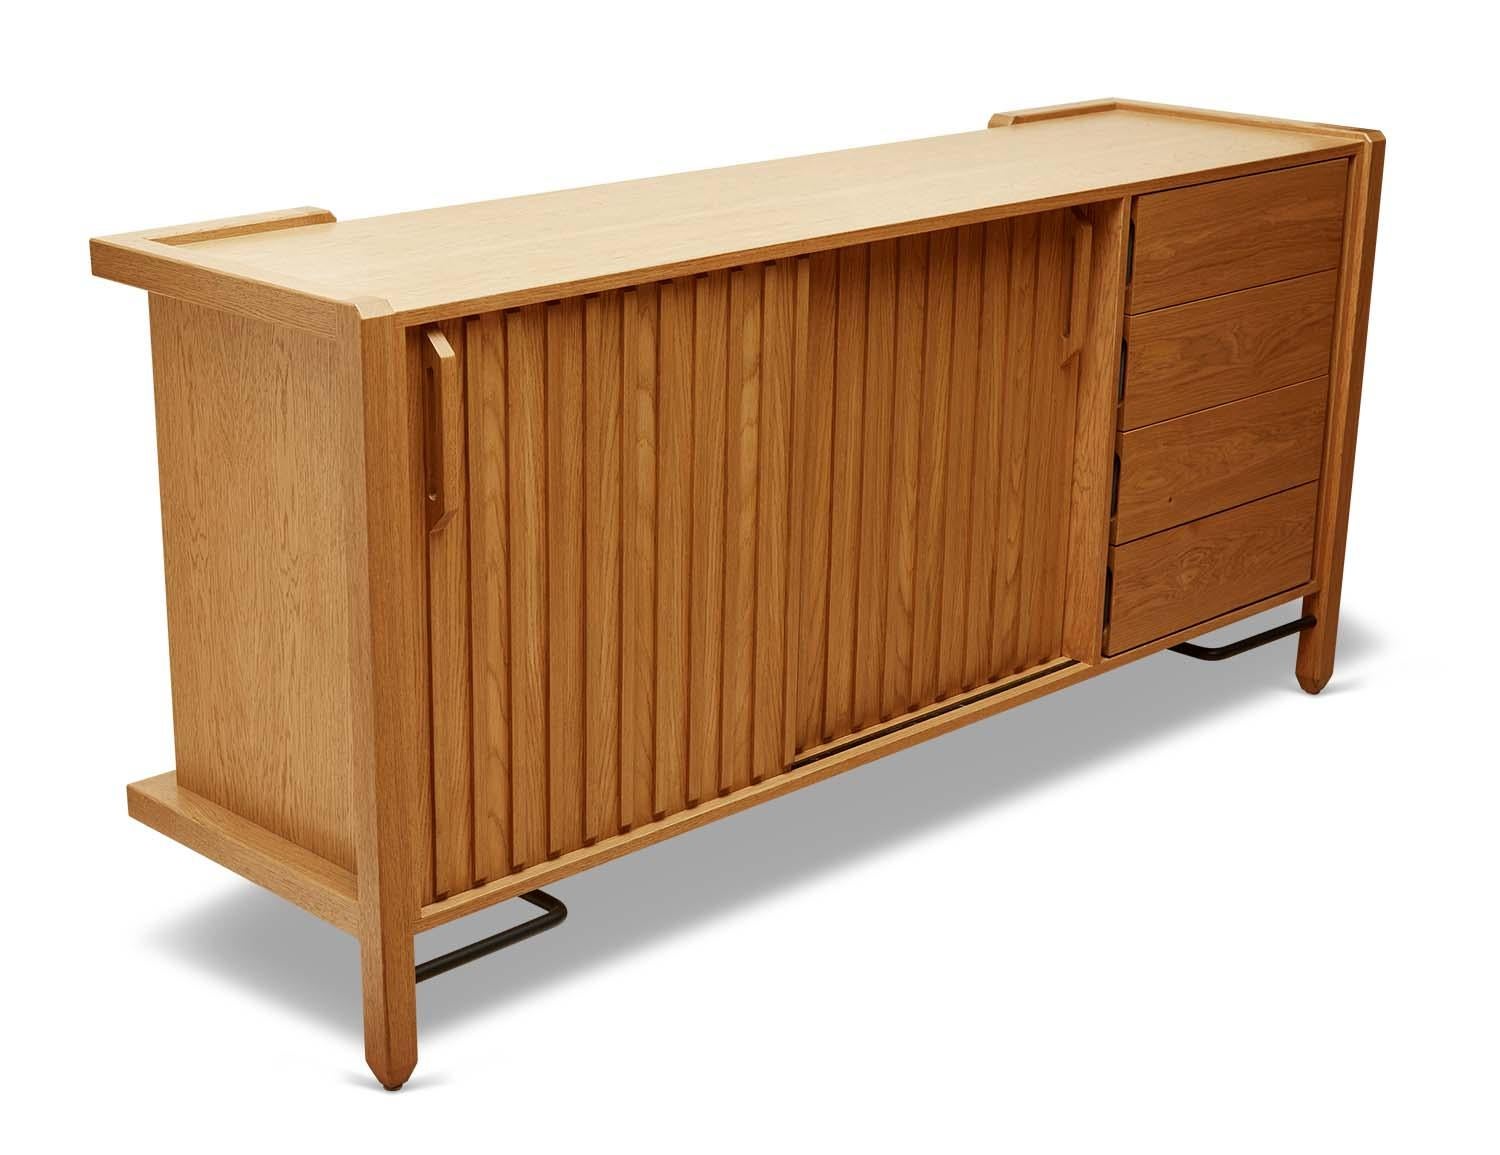 The Ojai credenza has four drawers and two bypass doors with open storage behind it. It has solid white oak or American walnut legs and case, and features a metal stretcher on the base.

The Lawson-Fenning Collection is designed and handmade in